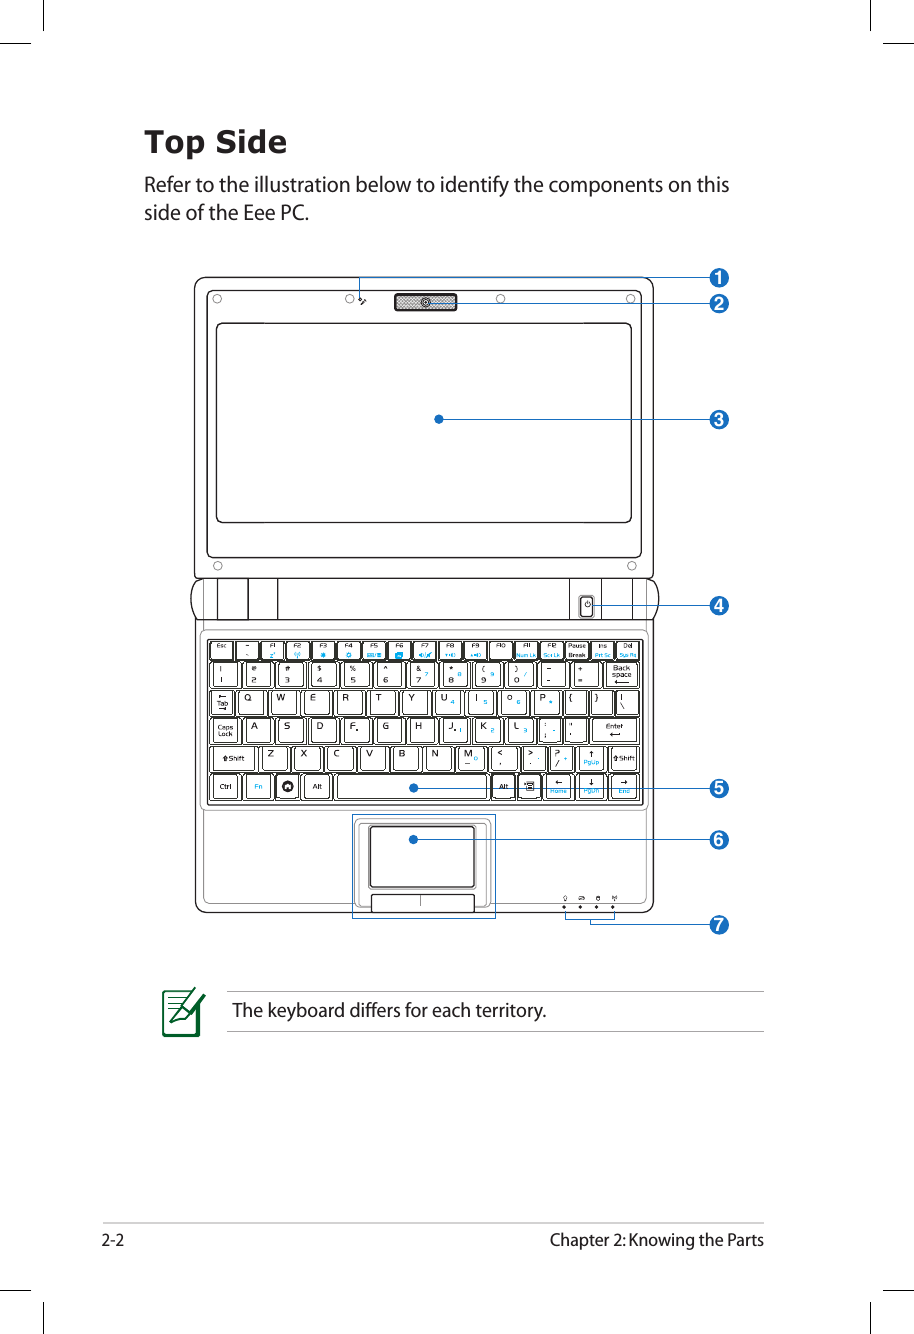 2-2Chapter 2: Knowing the PartsTop SideRefer to the illustration below to identify the components on this side of the Eee PC.The keyboard differs for each territory.3421657